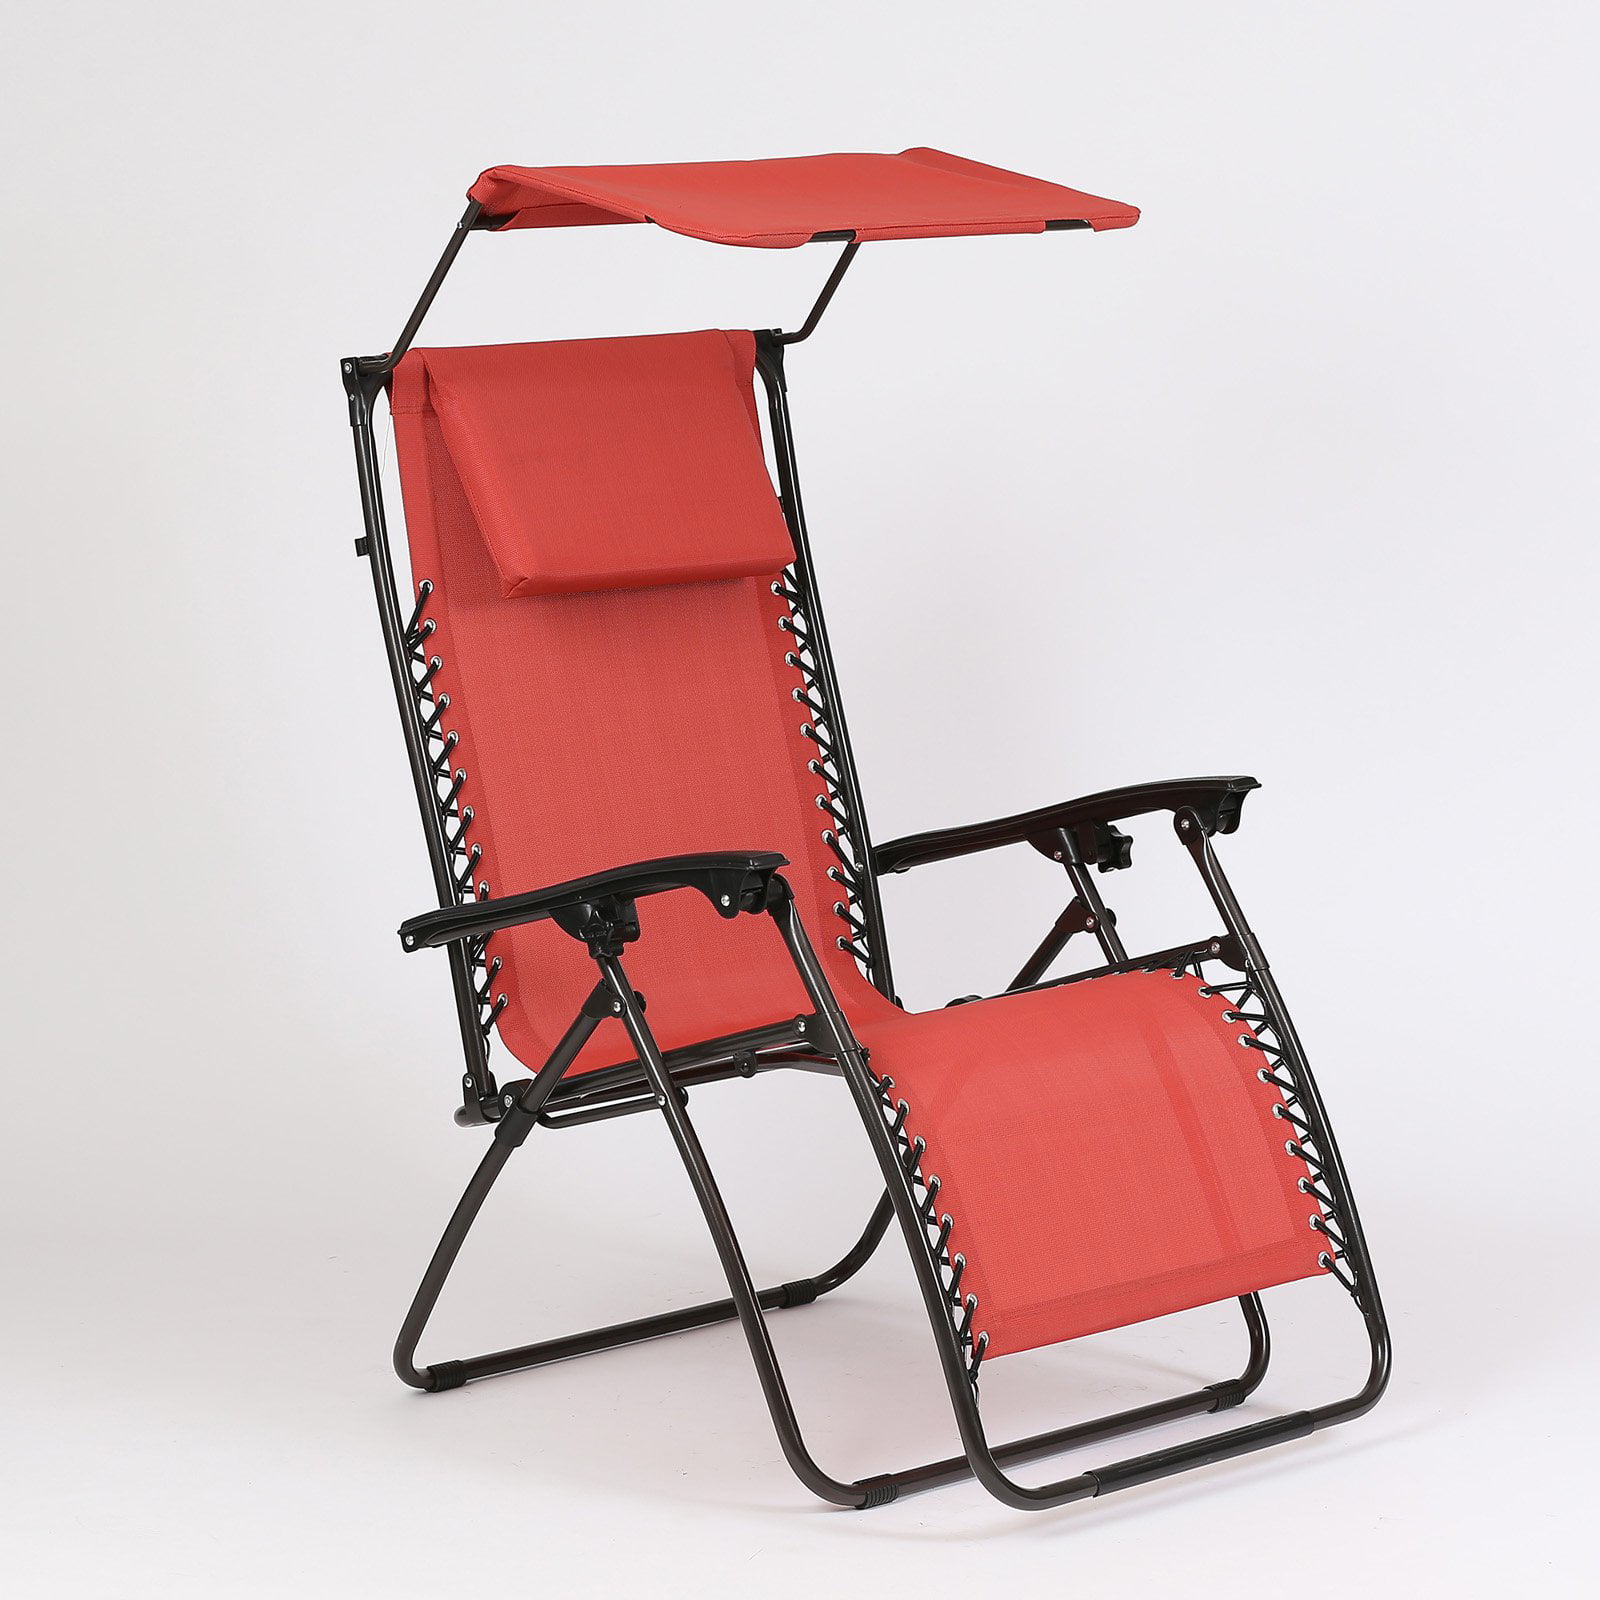 Red Deluxe Oversized Extra Large Zero Gravity Chair with Canopy Tray